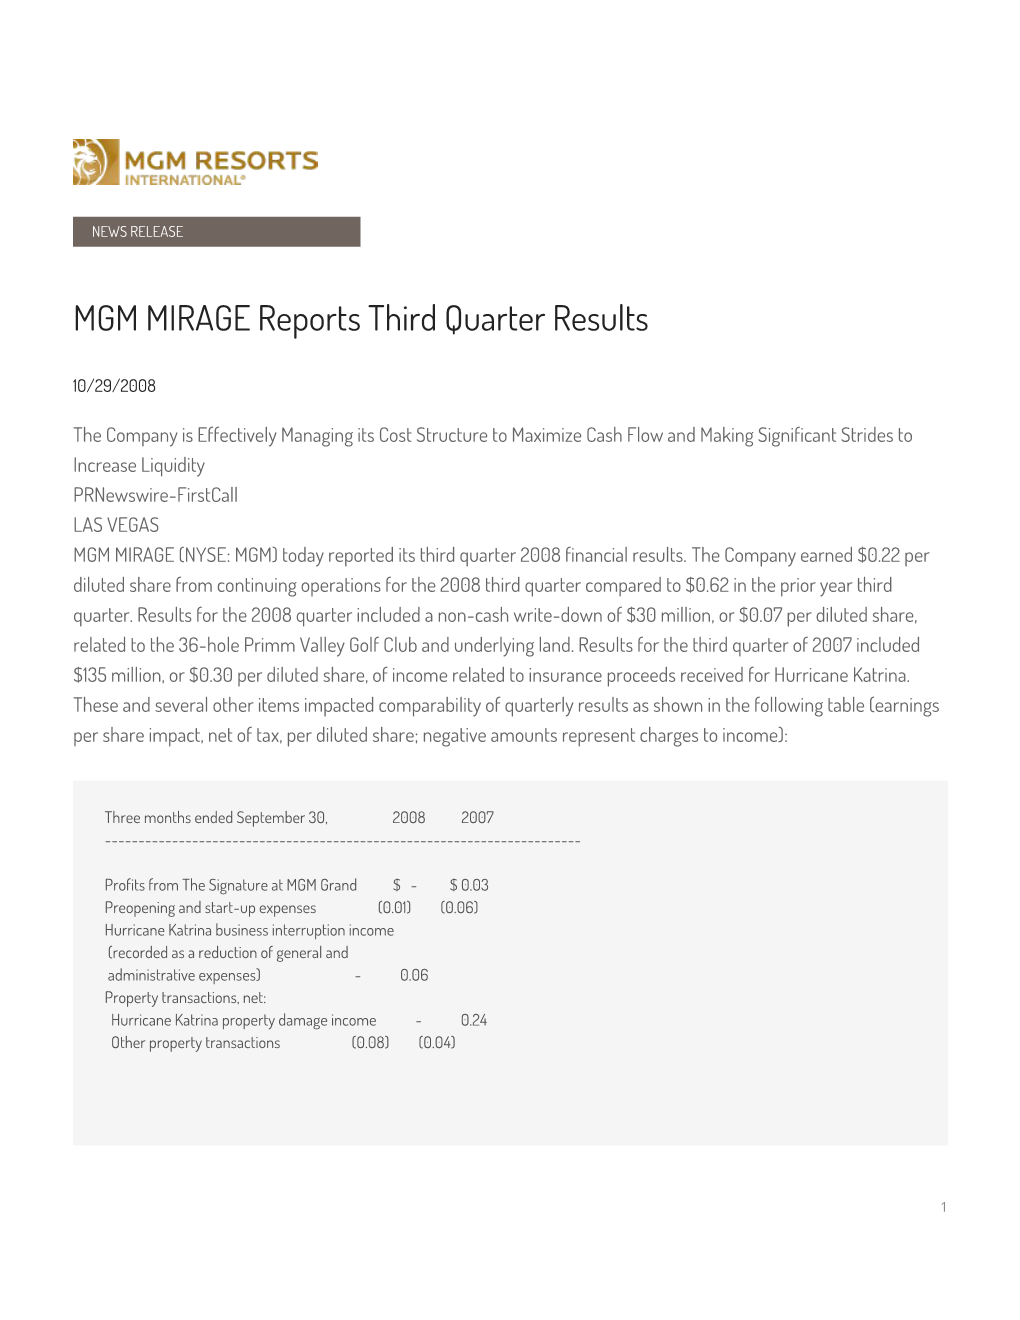 MGM MIRAGE Reports Third Quarter Results